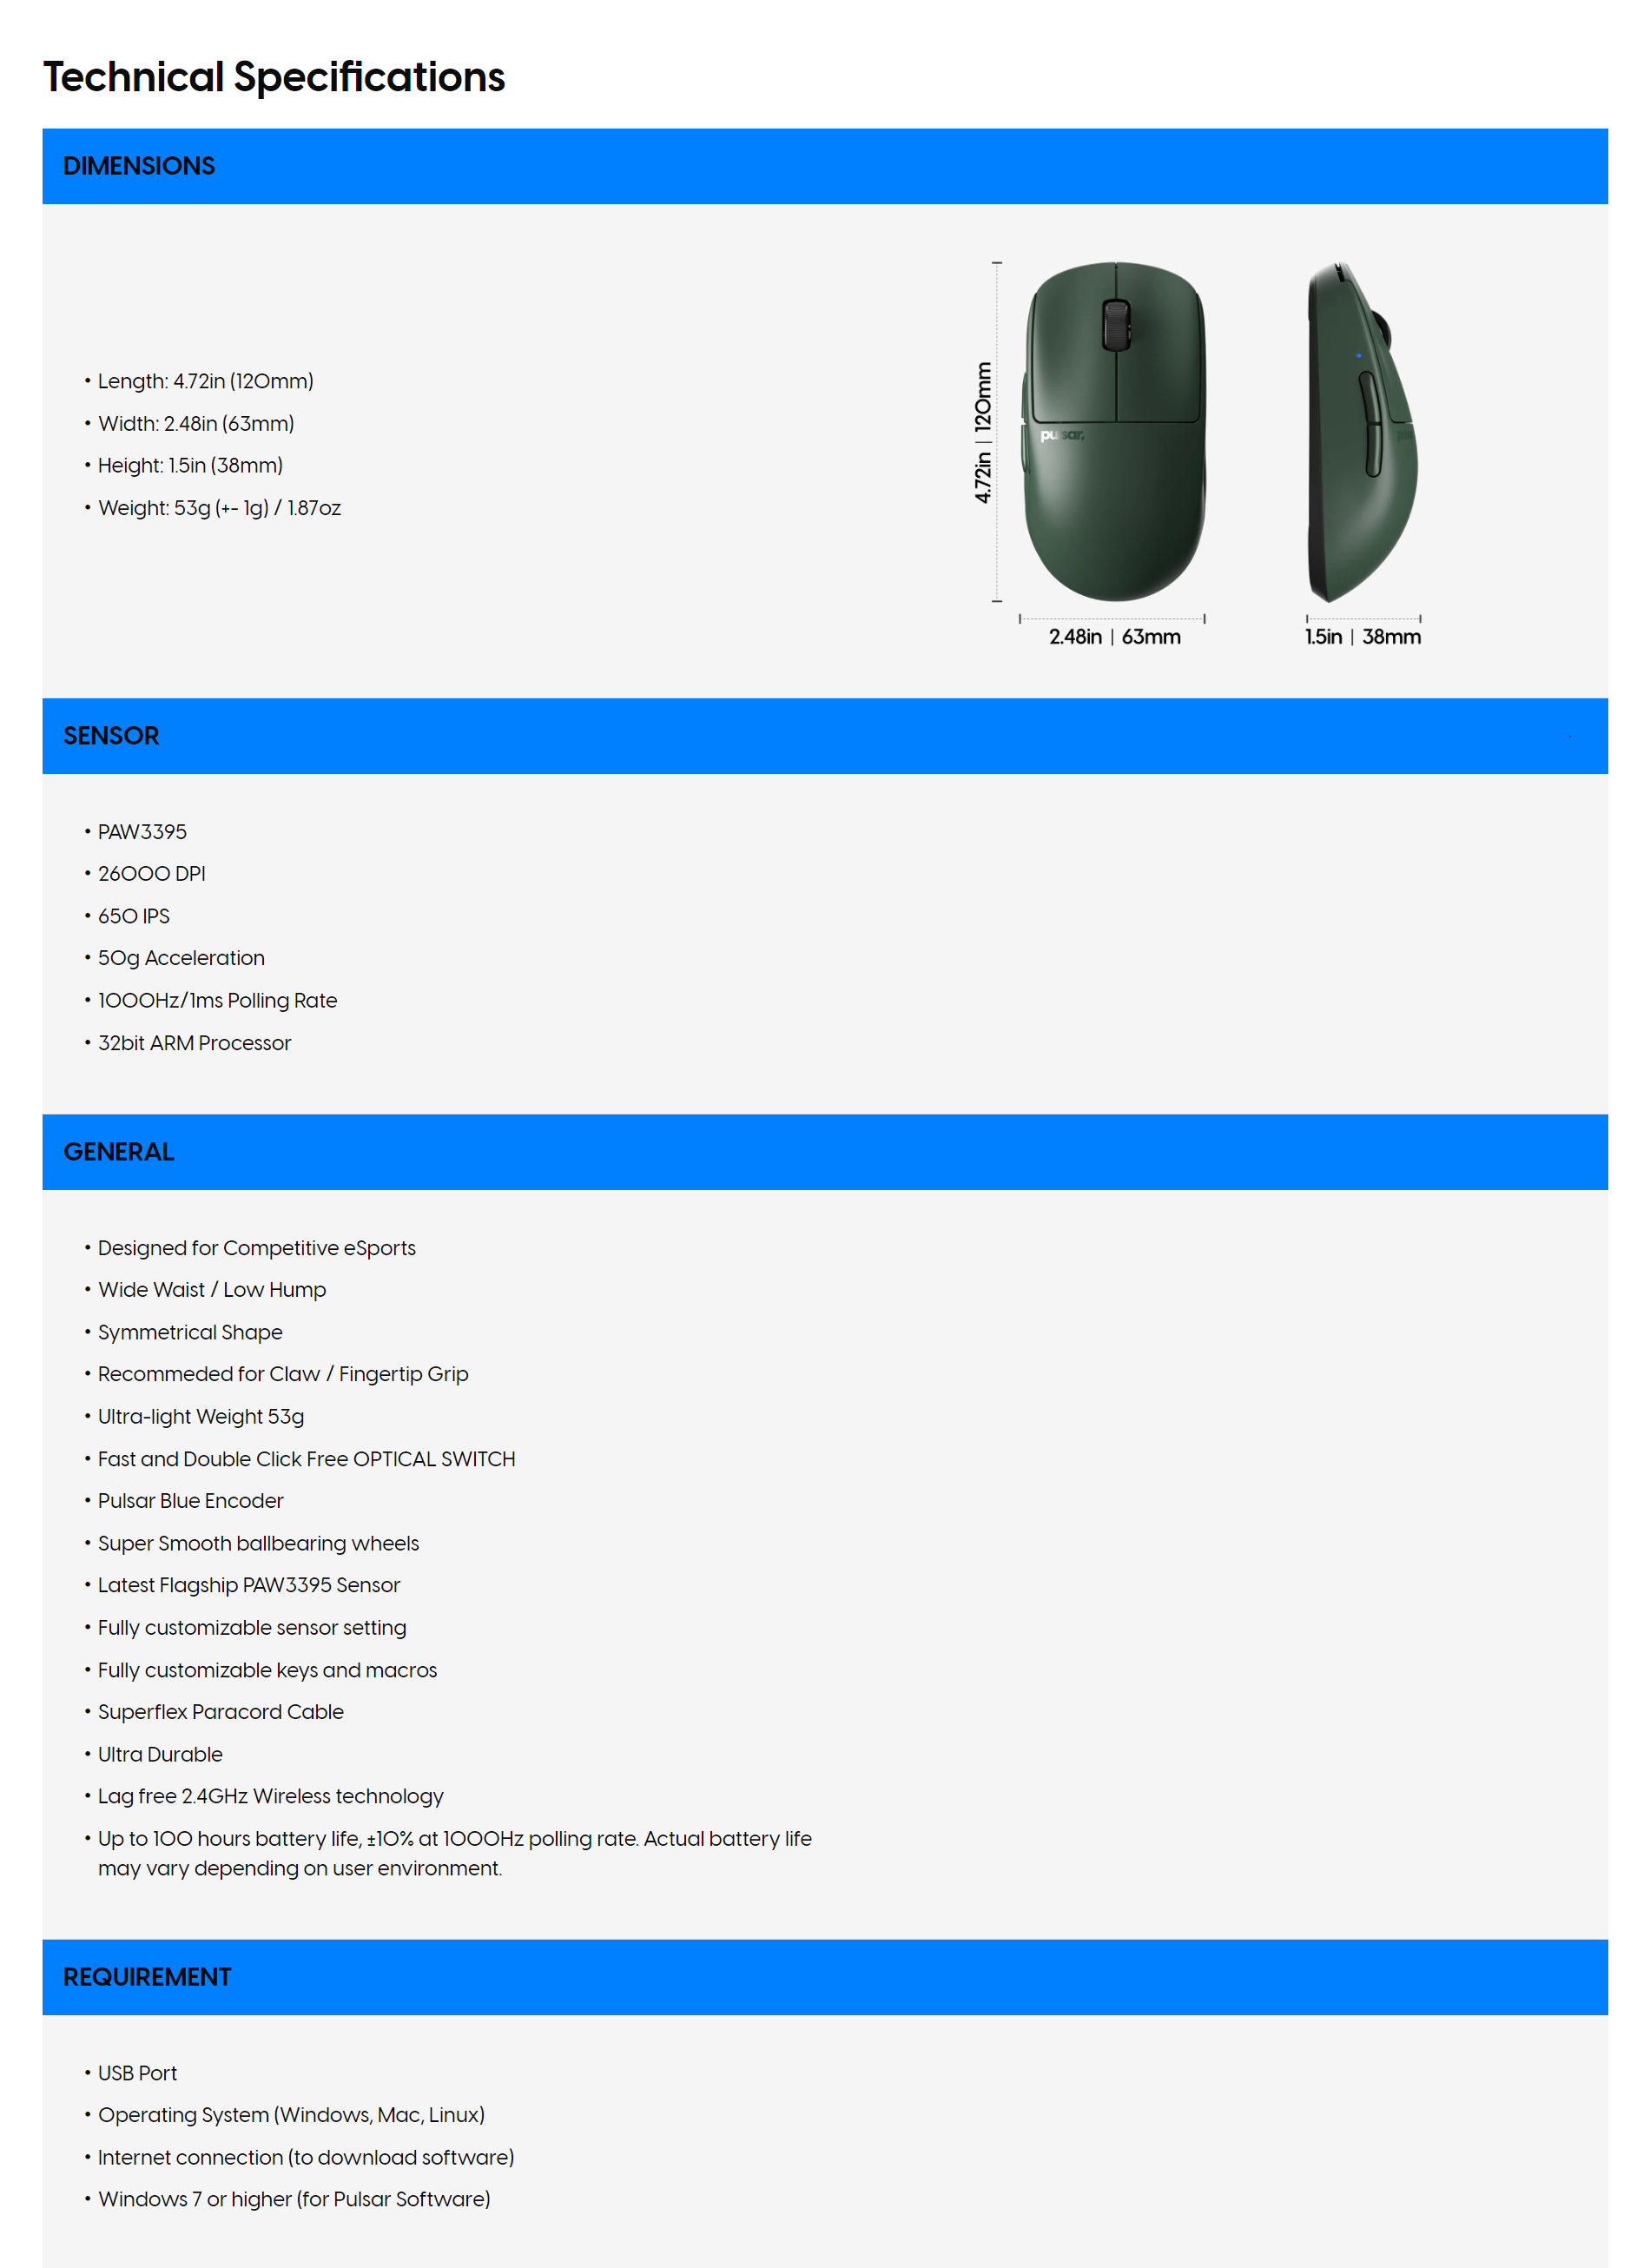 A large marketing image providing additional information about the product Pulsar X2V2 Wireless Gaming Mouse Limited Edition - Founder's Edition - Additional alt info not provided